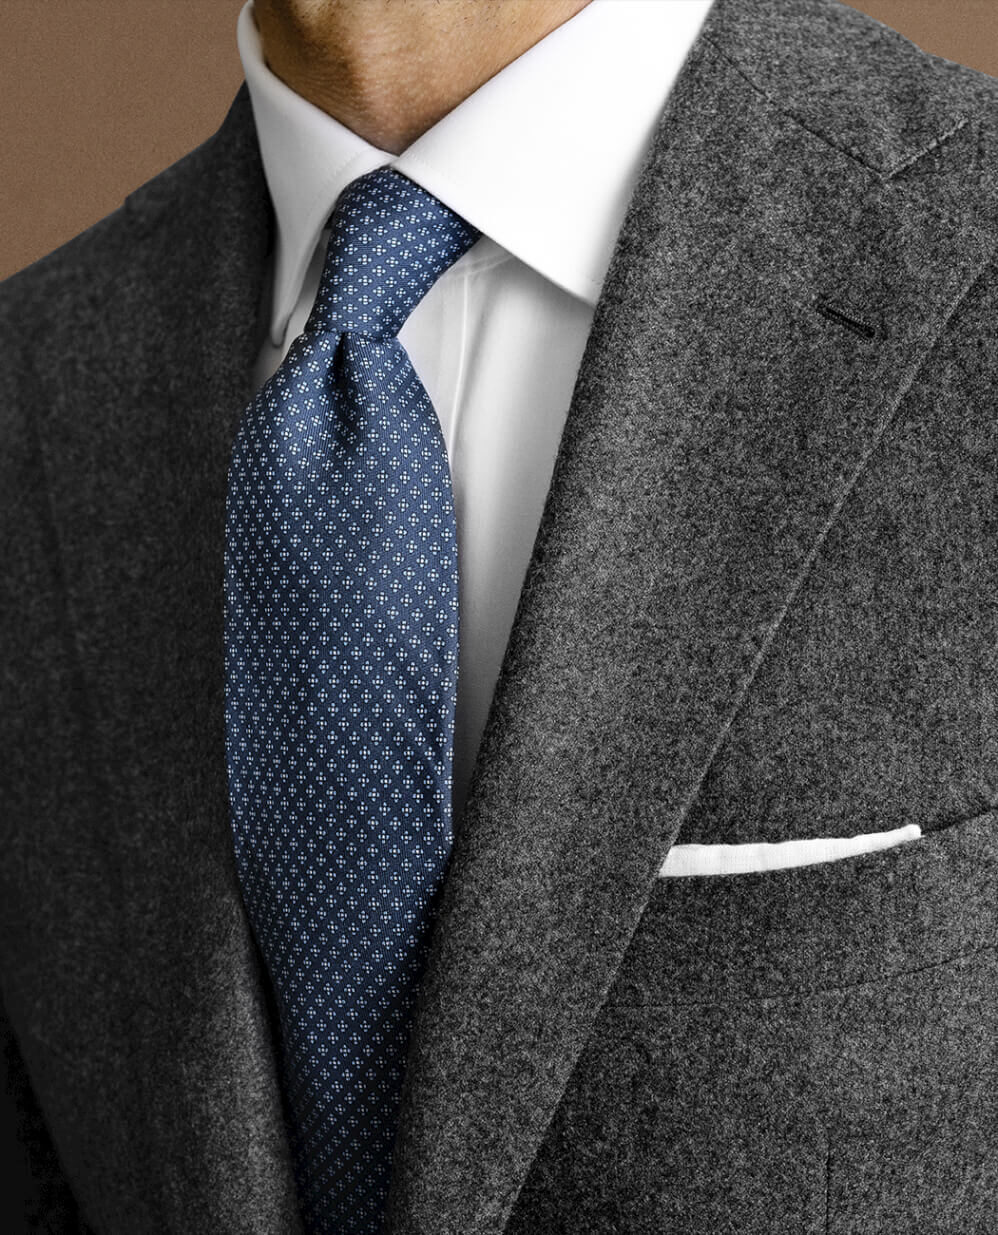 Look: The Wool Flannel Suit Zoomed